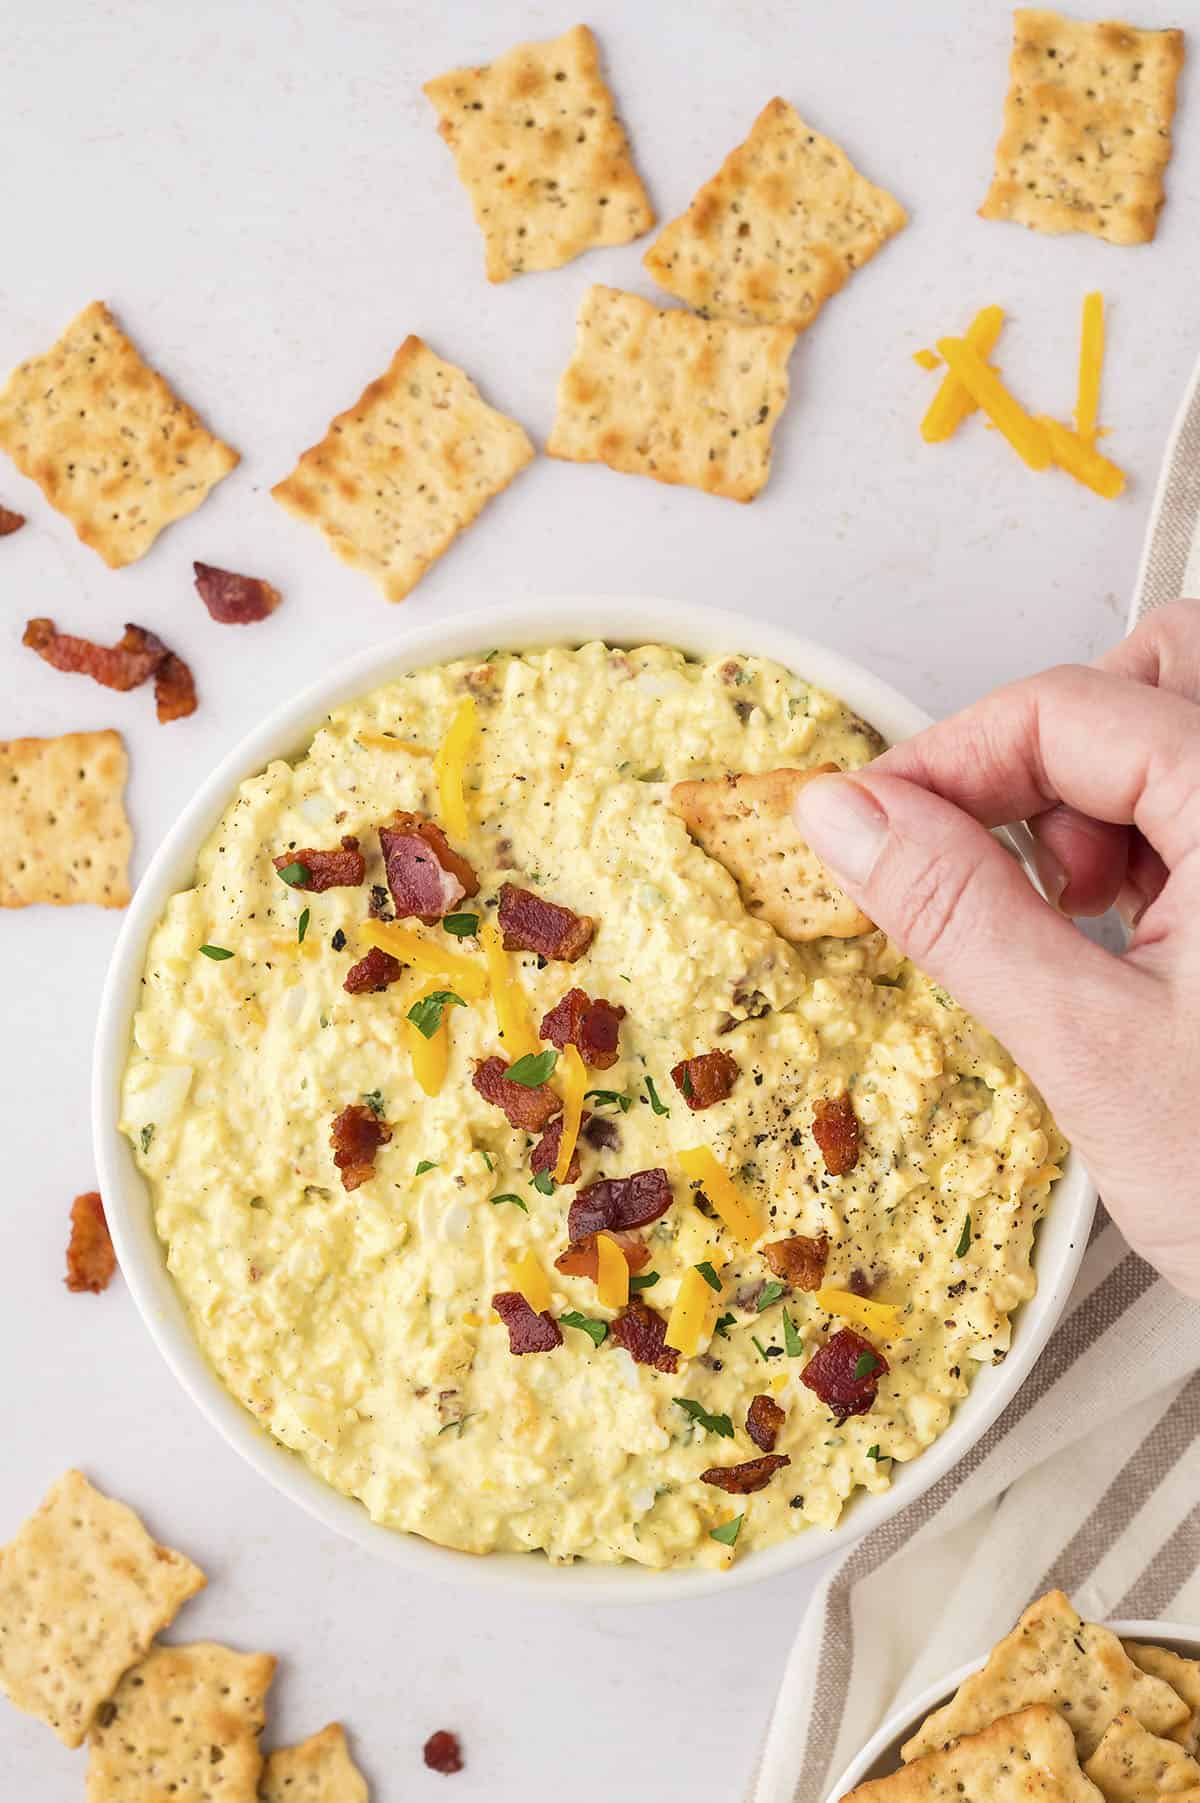 Wondering how to make egg salad that your whole family will love? Add bacon and cheddar! This is the best egg salad recipe ever!